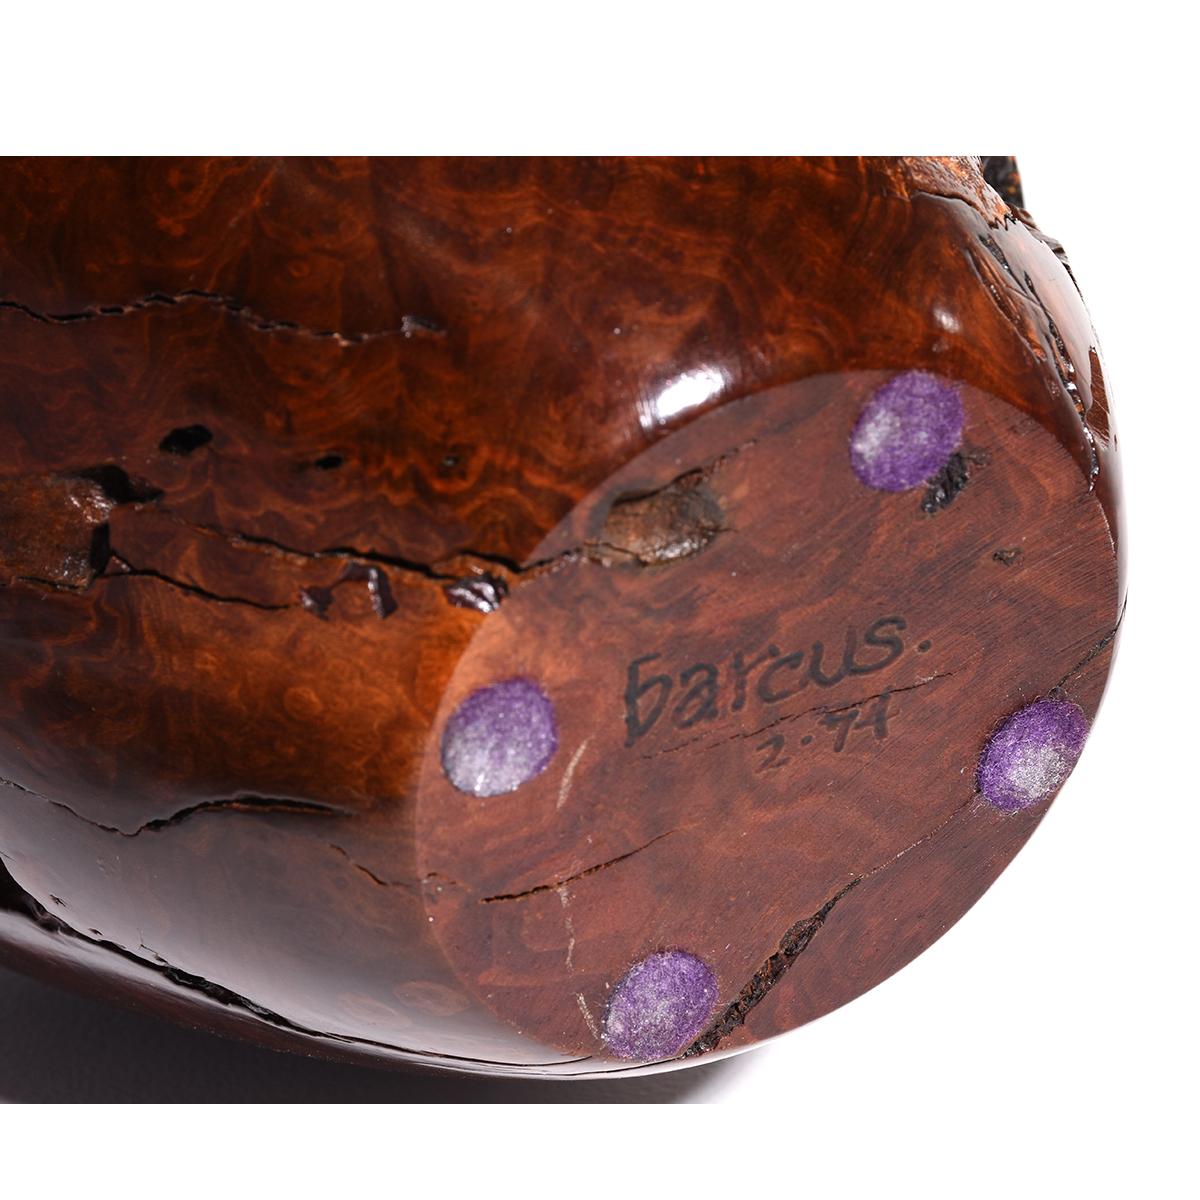 This turned Burlwood vase has rich earth tones with copper highlights. The swirling burl pattern comes through the glossy surface that contrasts with the characteristic rough burl depressions and natural cracks running throughout the piece. The vase